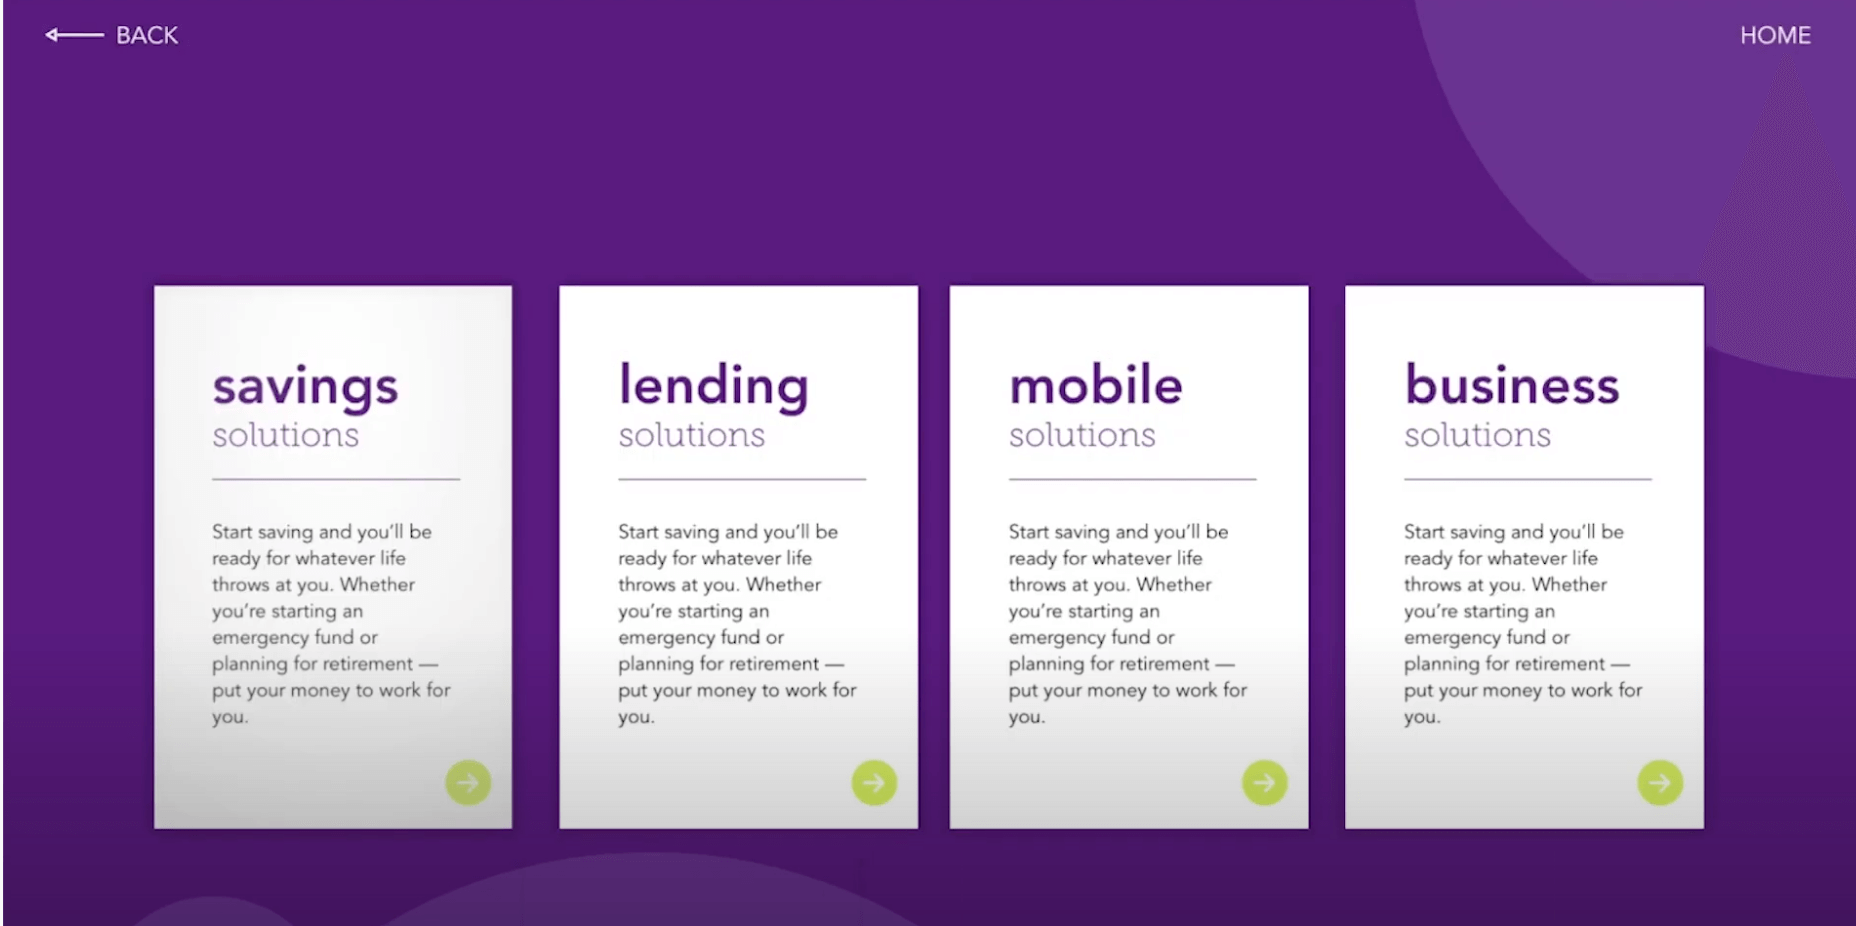 A digital brochure display screen featuring four white rectangles over a purple background, each representing a brochure category: “Savings,” “Lending,” “Mobile,” and “Business.”